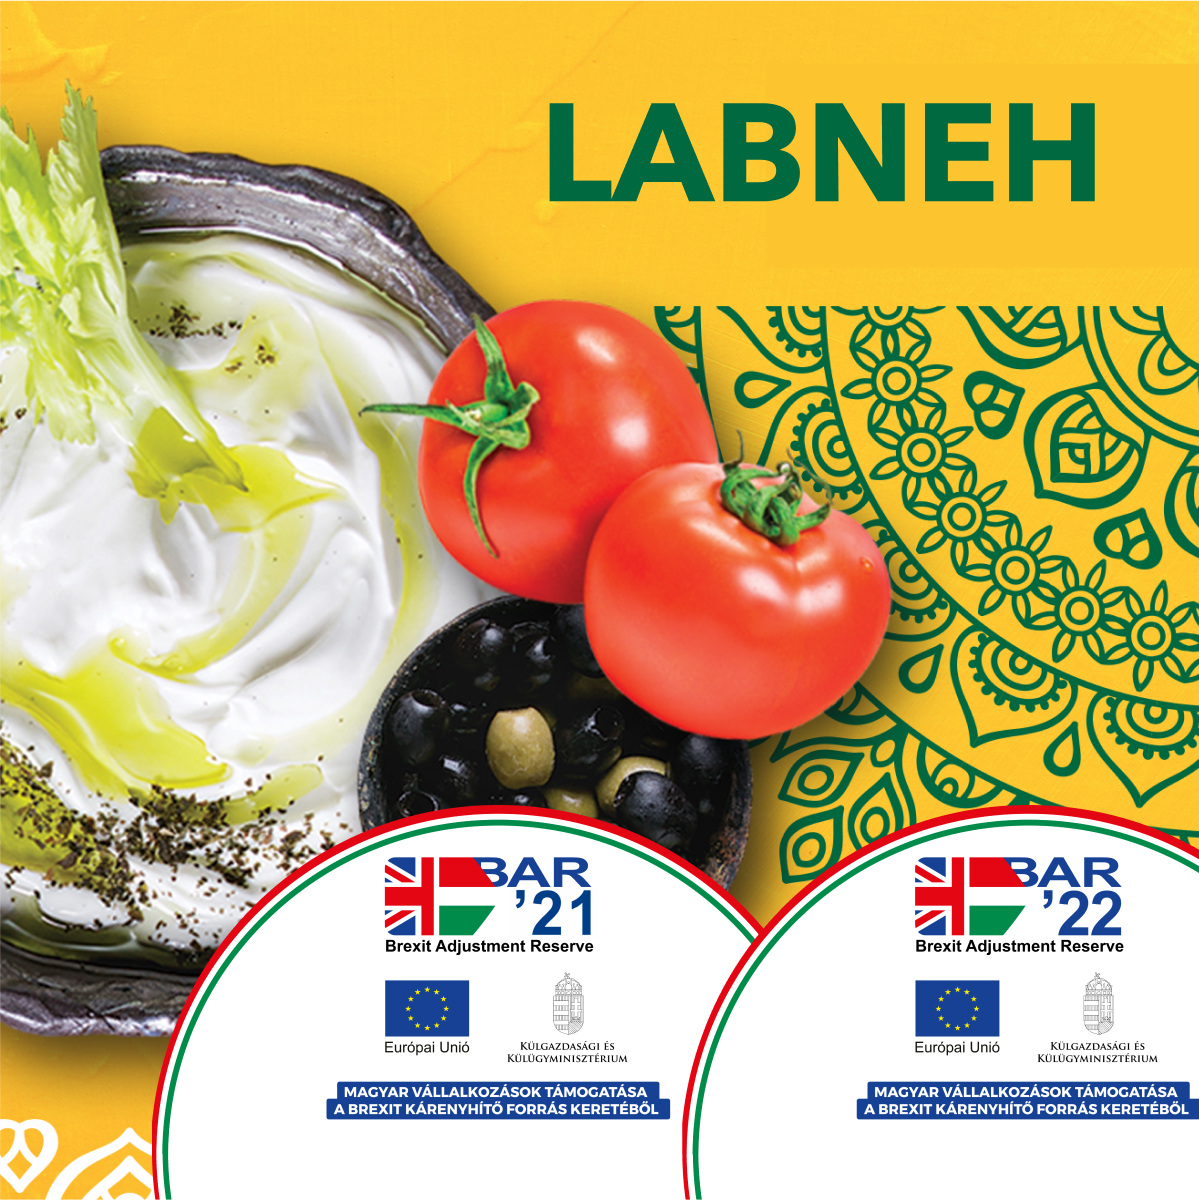 Let’s have some Labneh!